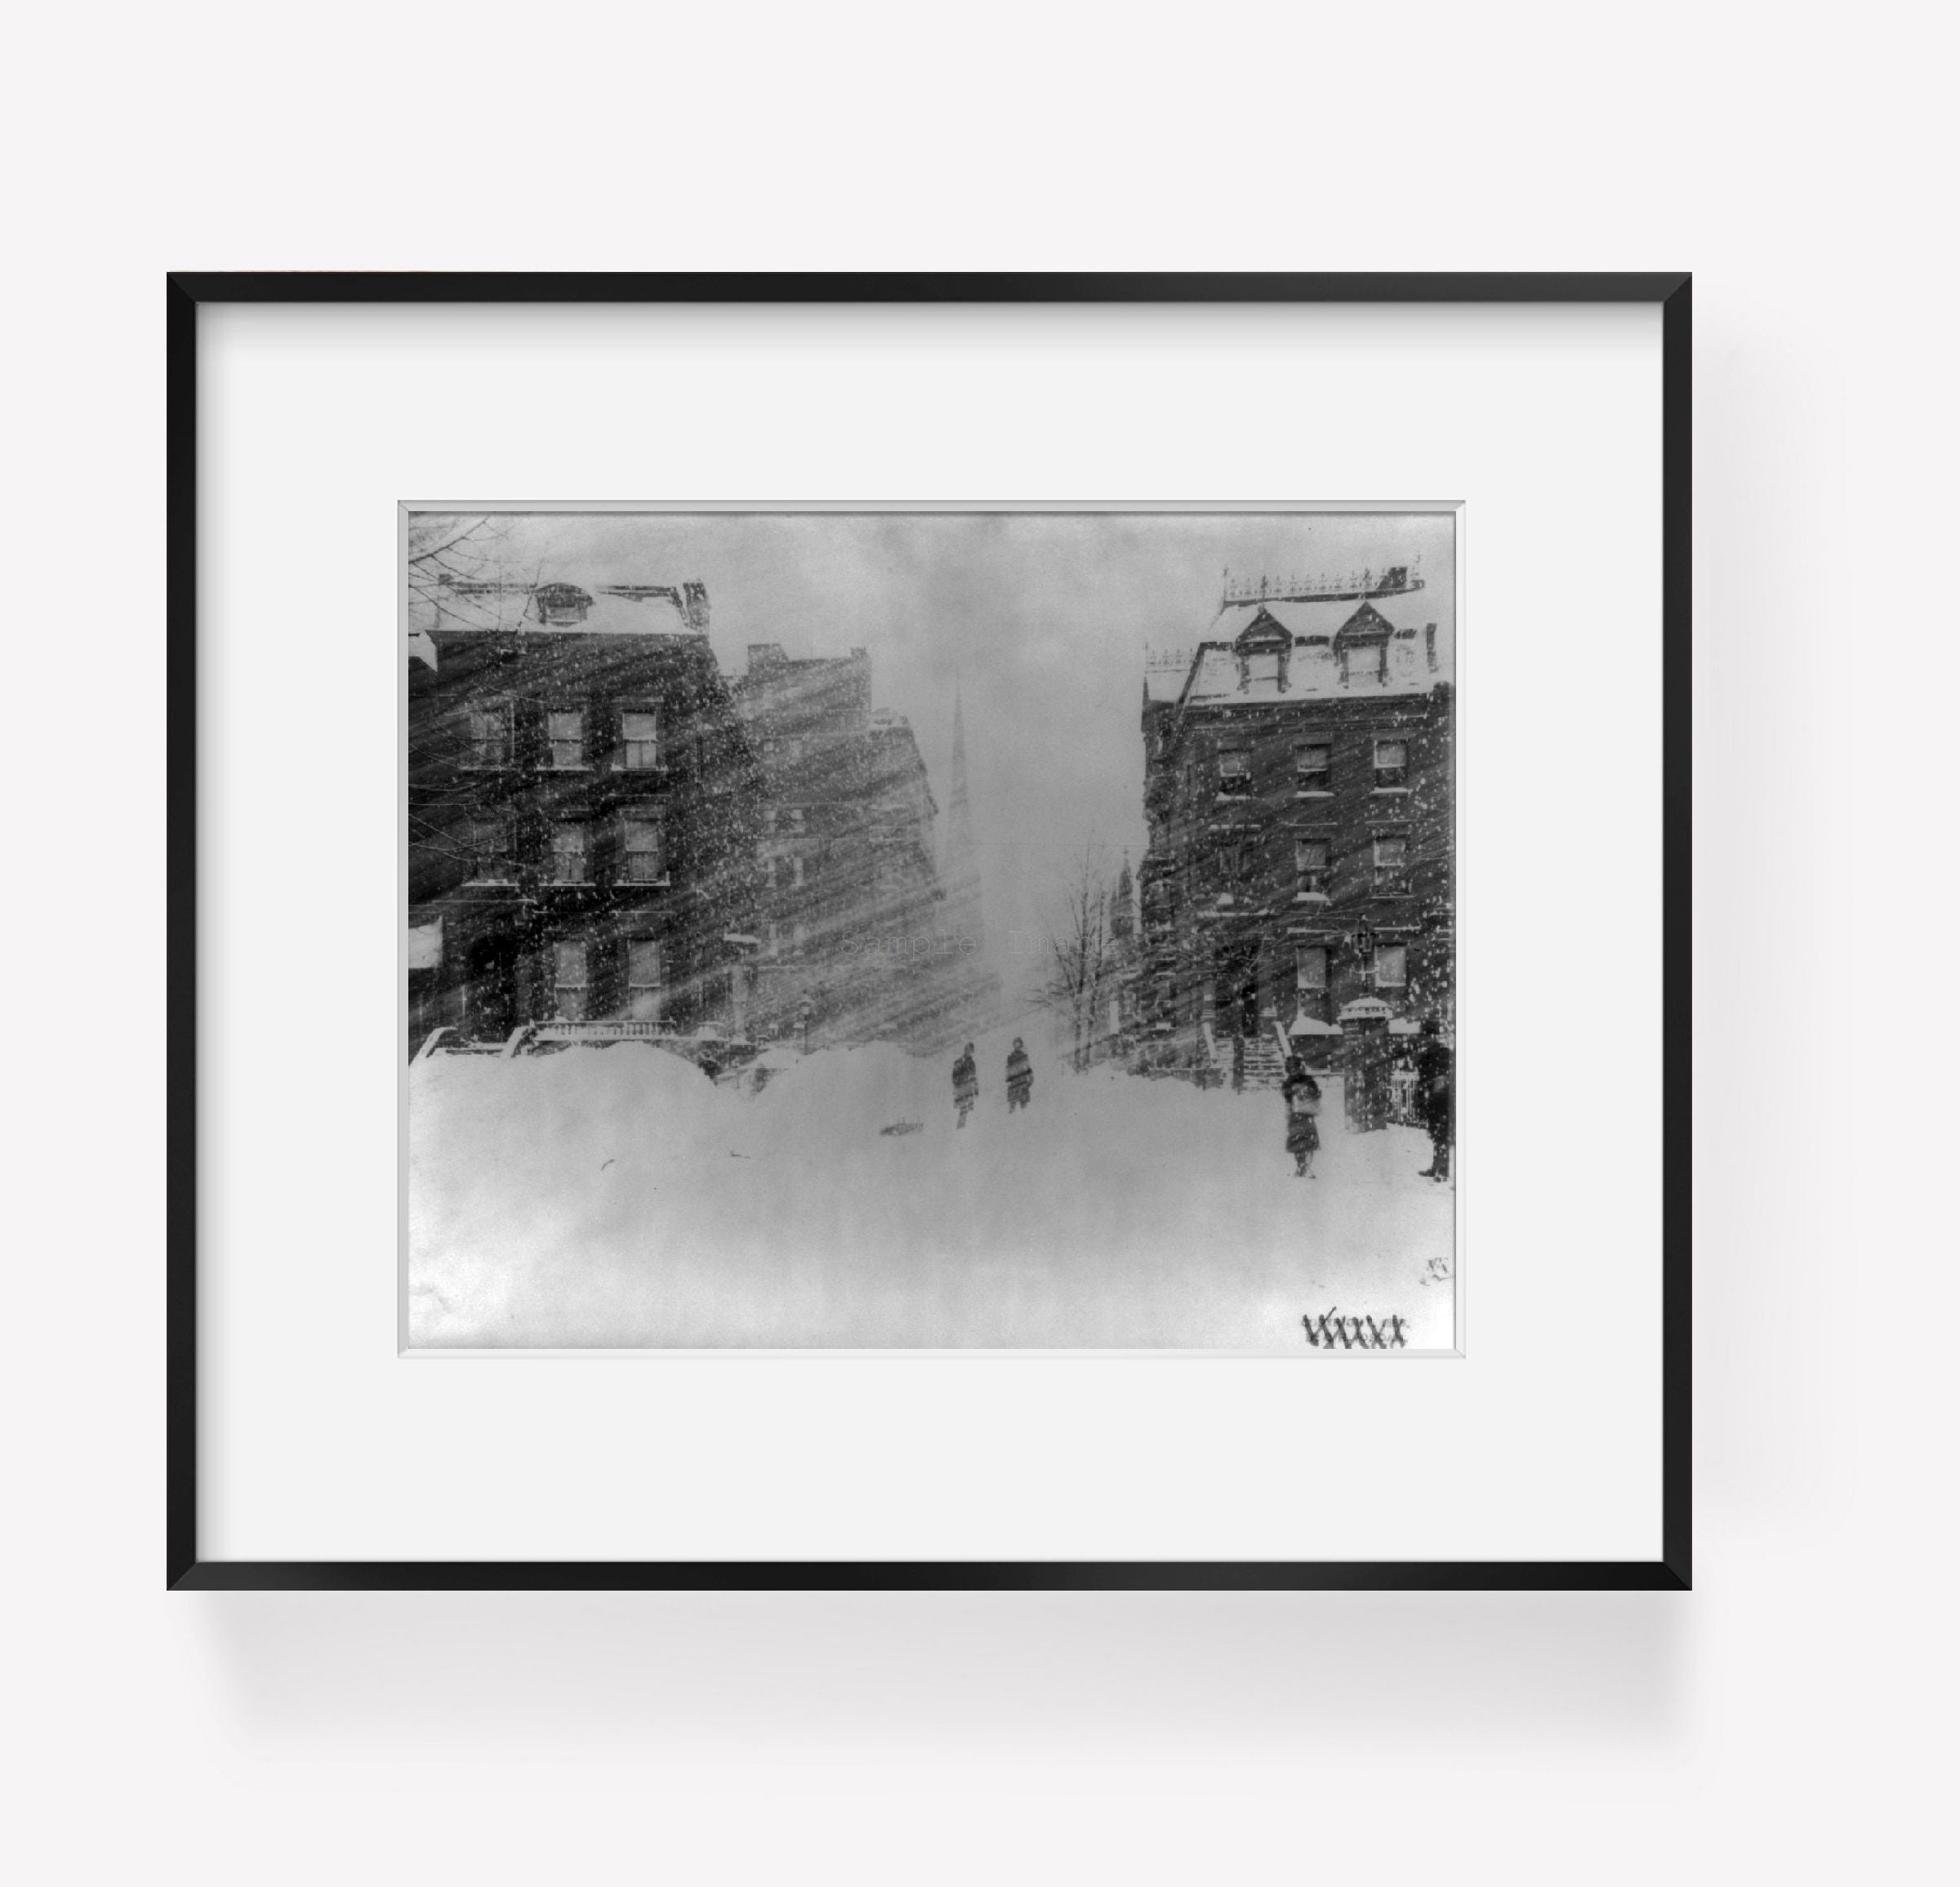 Photo: New York City, Blizzard of 1888, street scene during blizzard, NYC, people ou